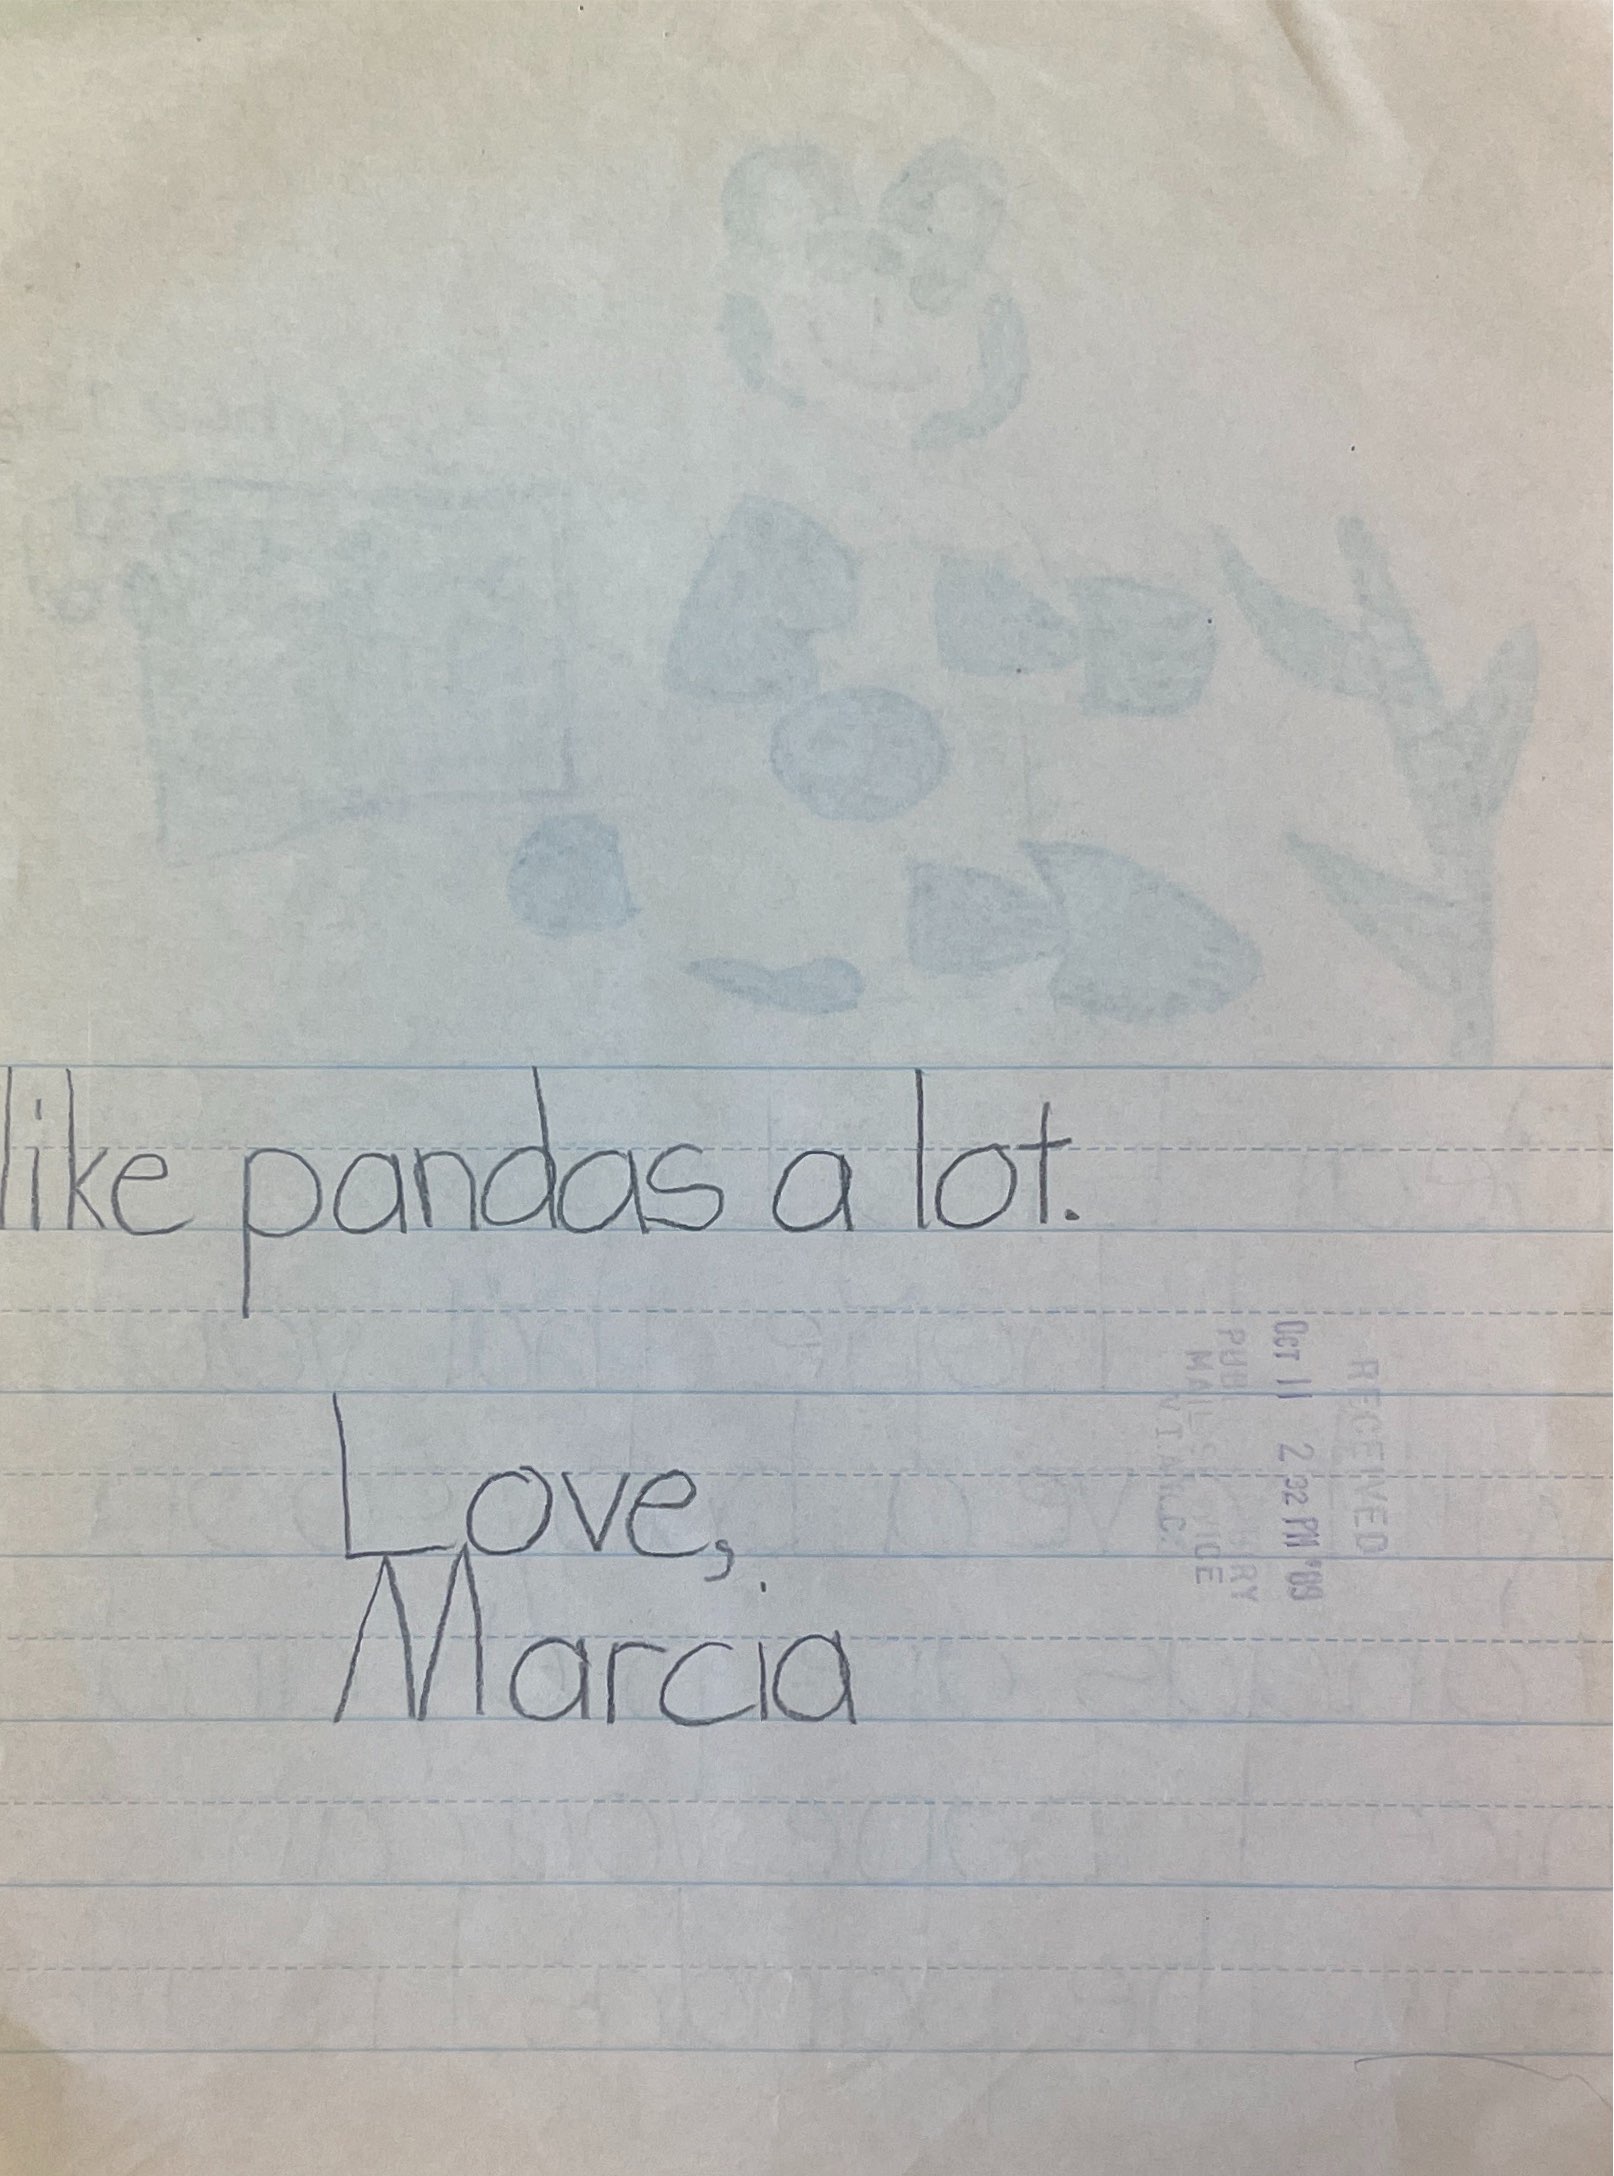 Letter to Ling-Ling. Marcia hoped that Ling-Ling will have a baby soon, and shares that the pandas a